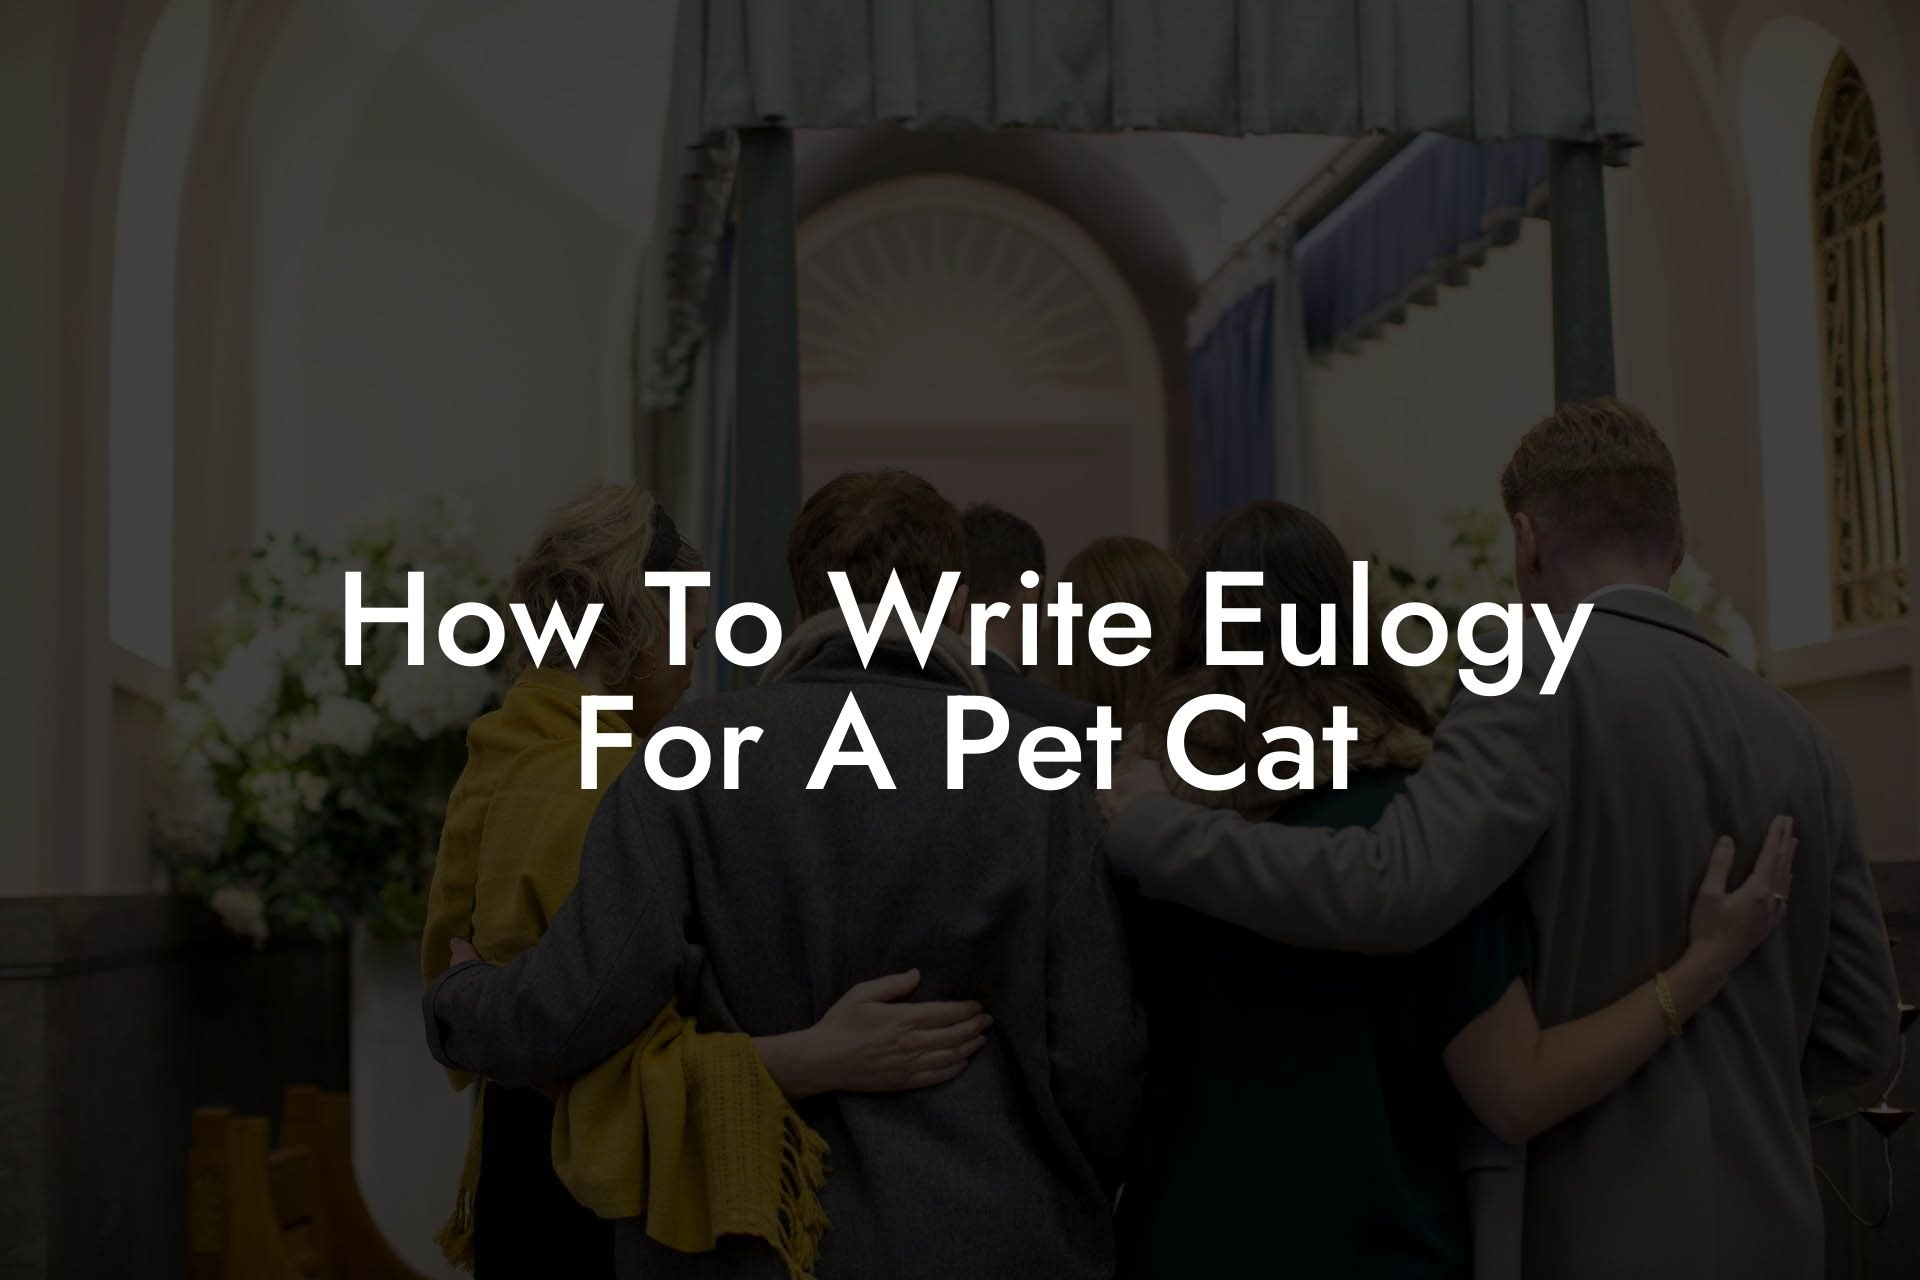 How To Write Eulogy For A Pet Cat